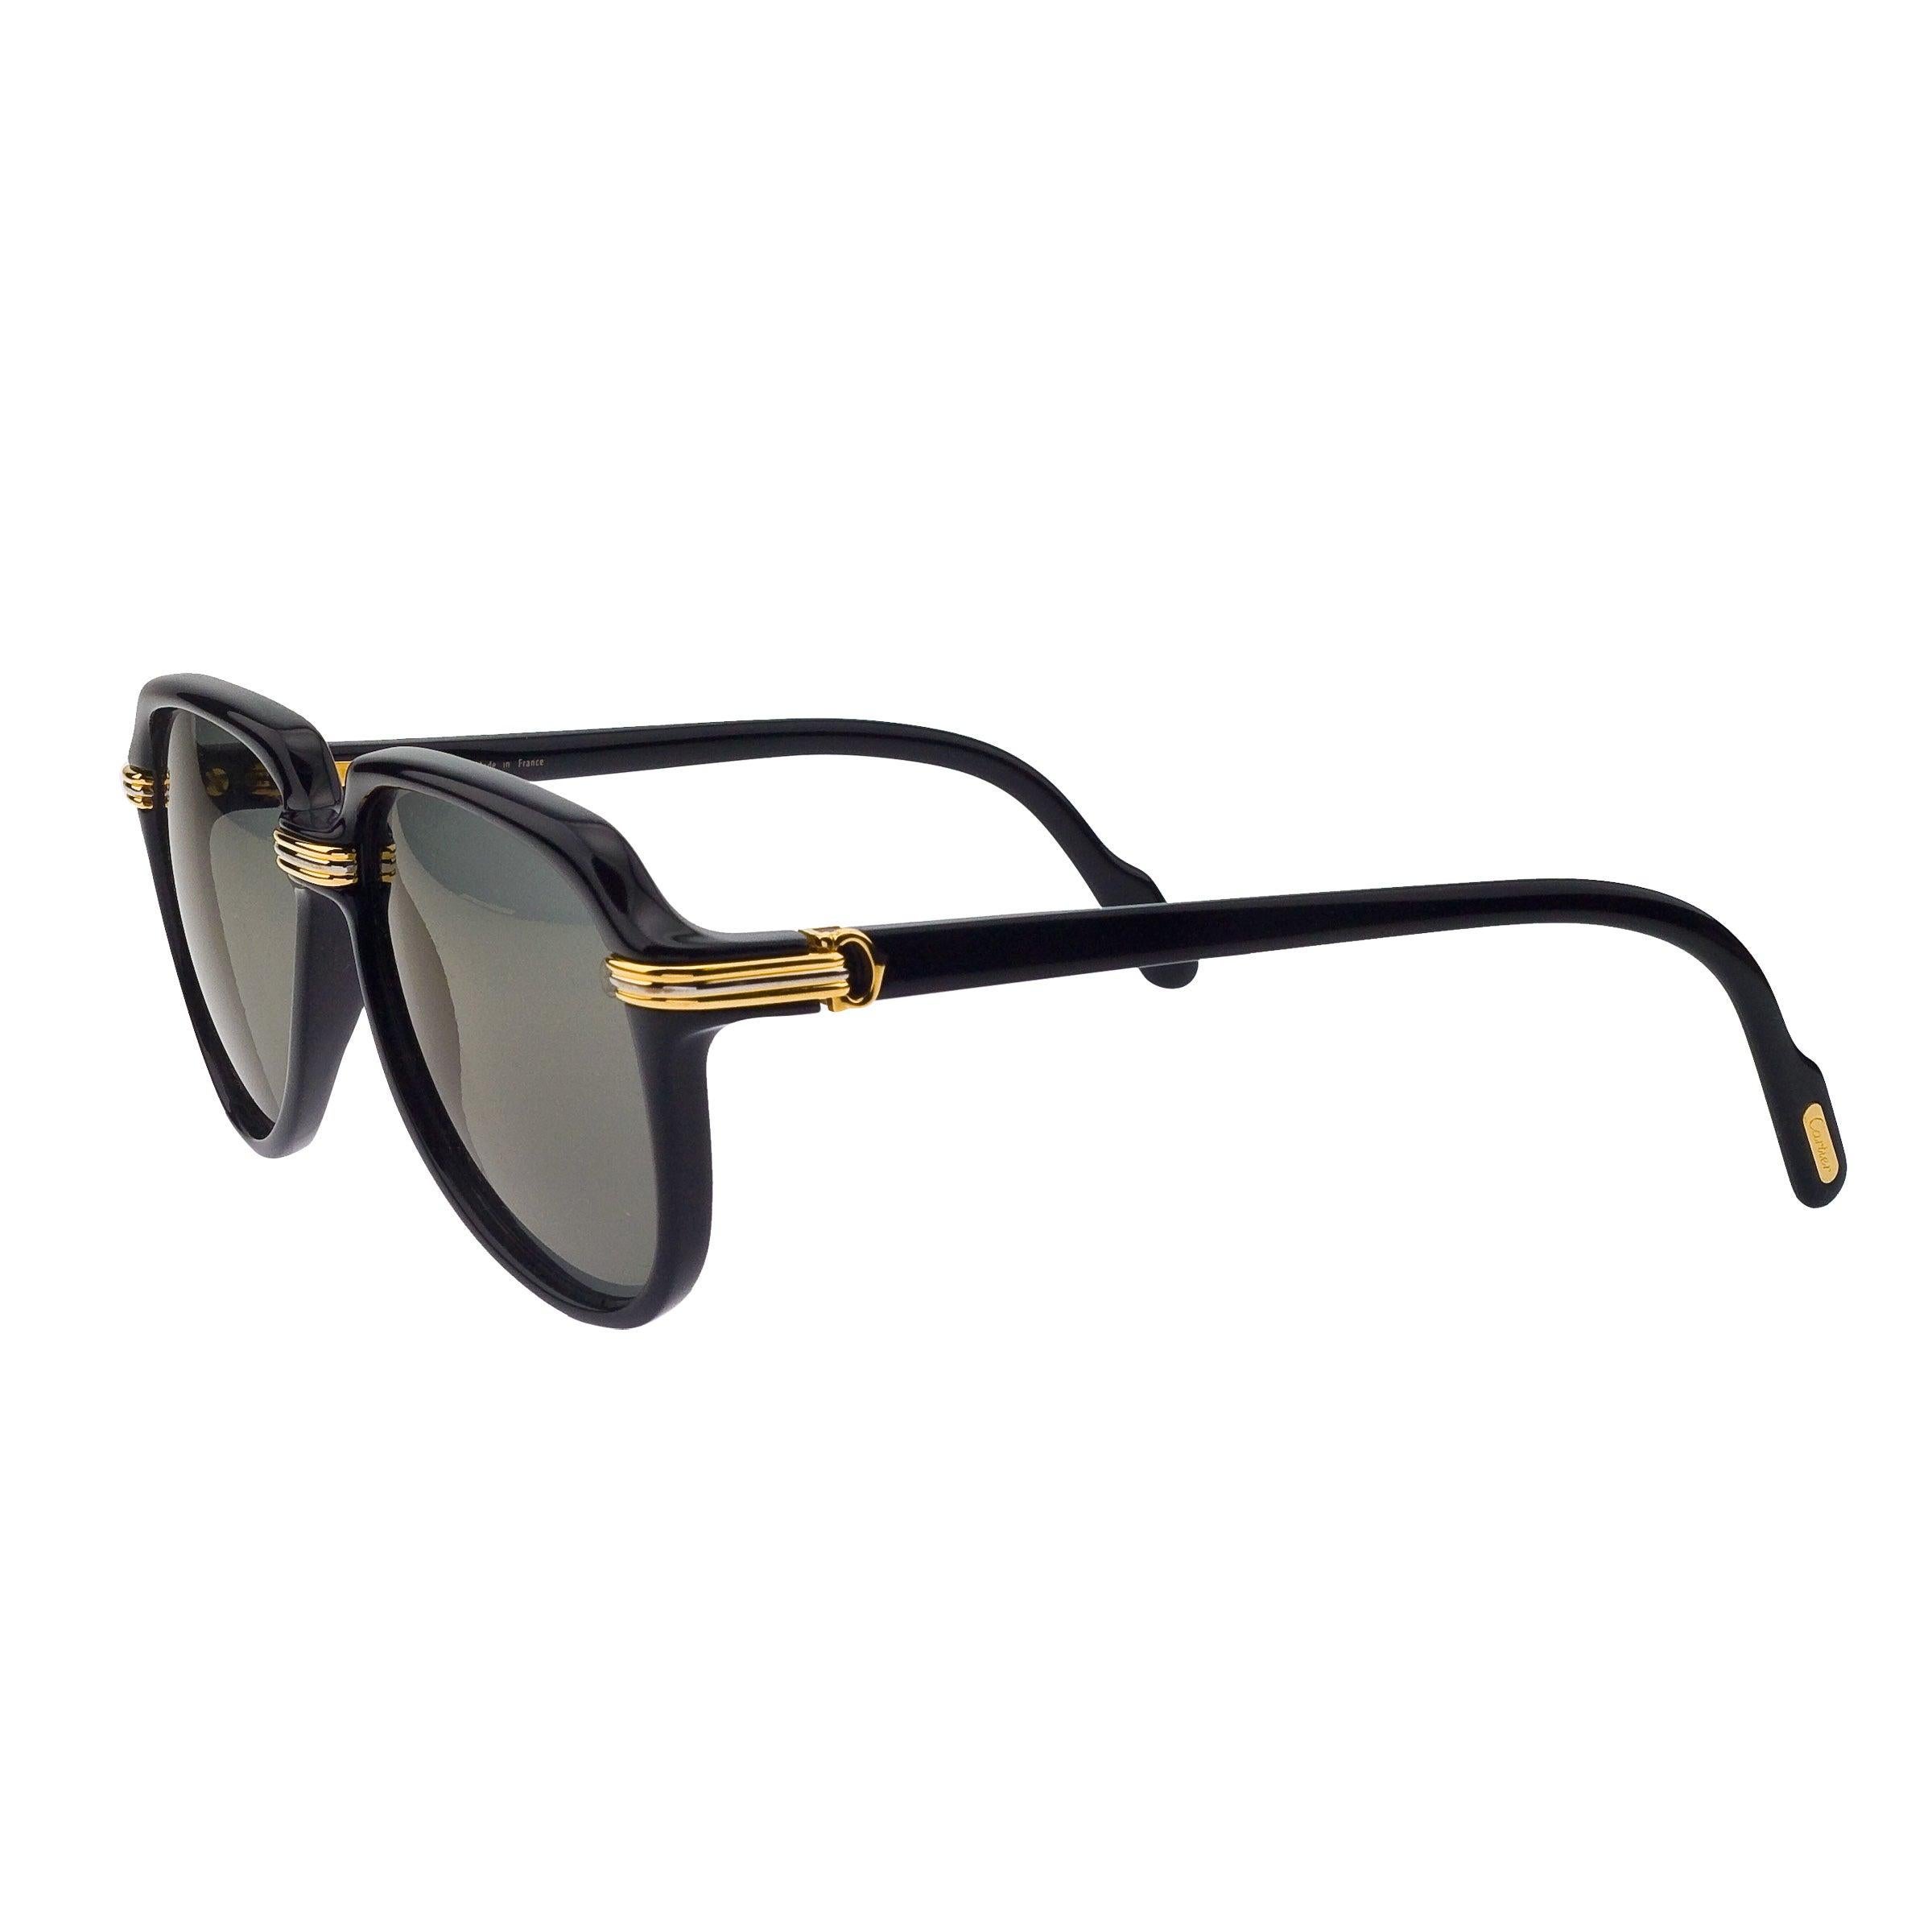 Cartier Vintage Black Vitesse Sunglasses In Excellent Condition For Sale In Chicago, IL